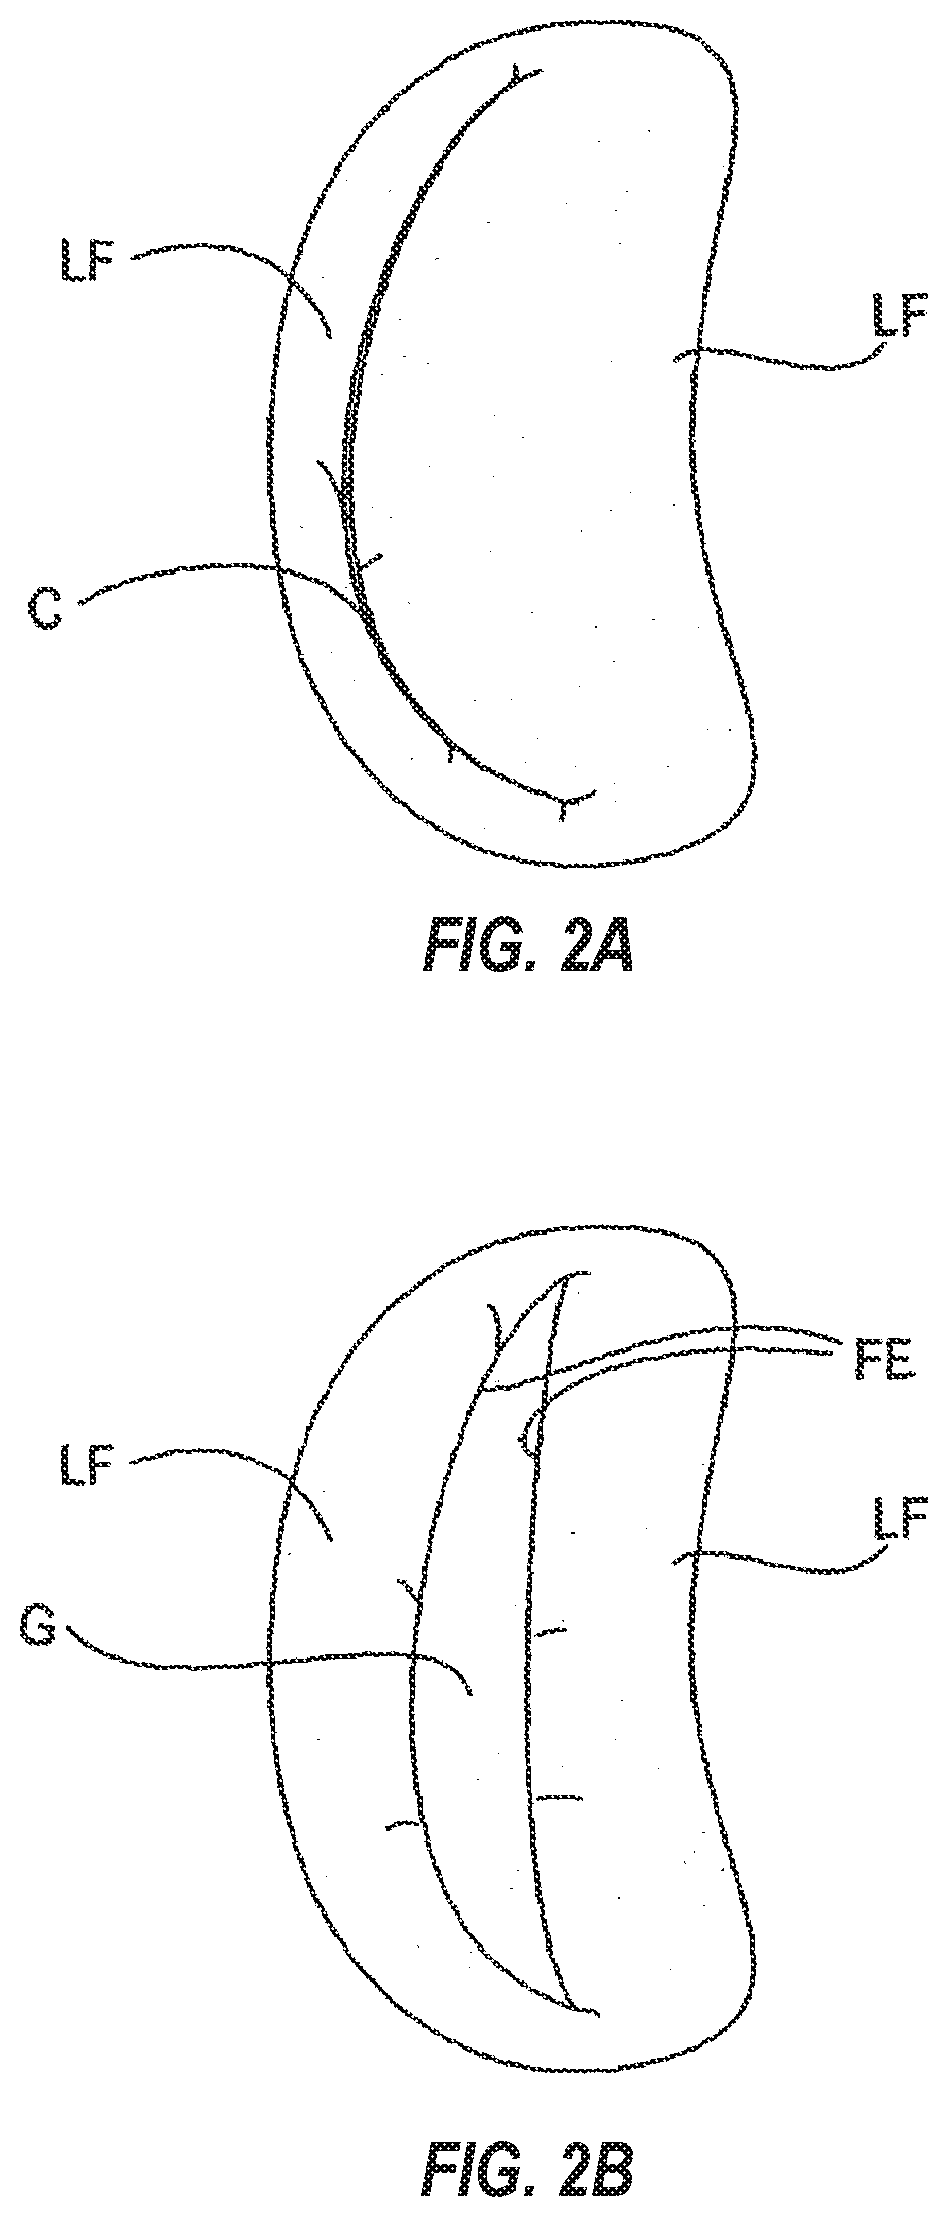 Tissue cutting systems, devices and methods